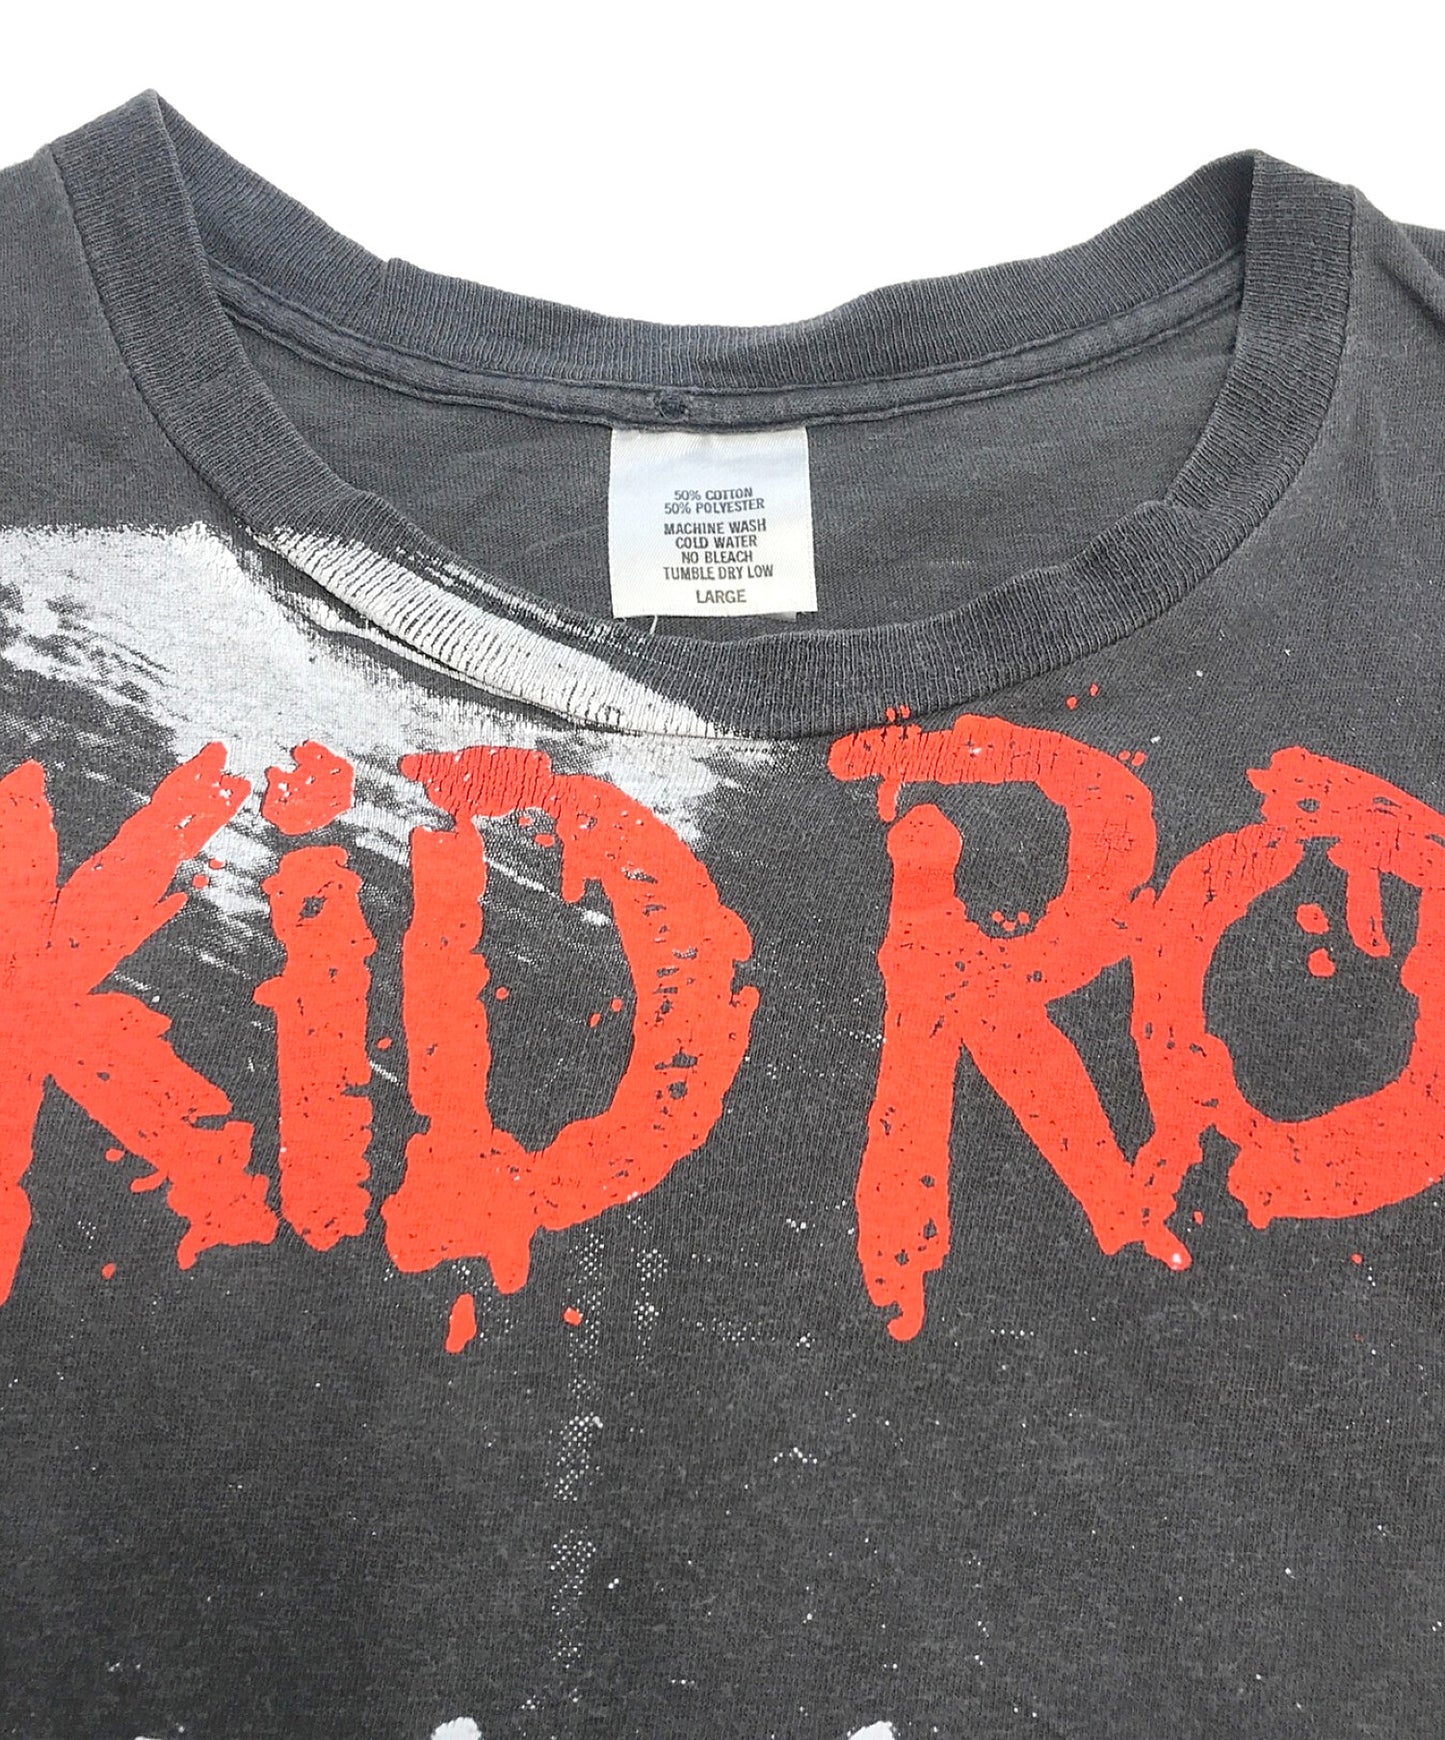 Skid Row 89's All Over Band T-Shirt